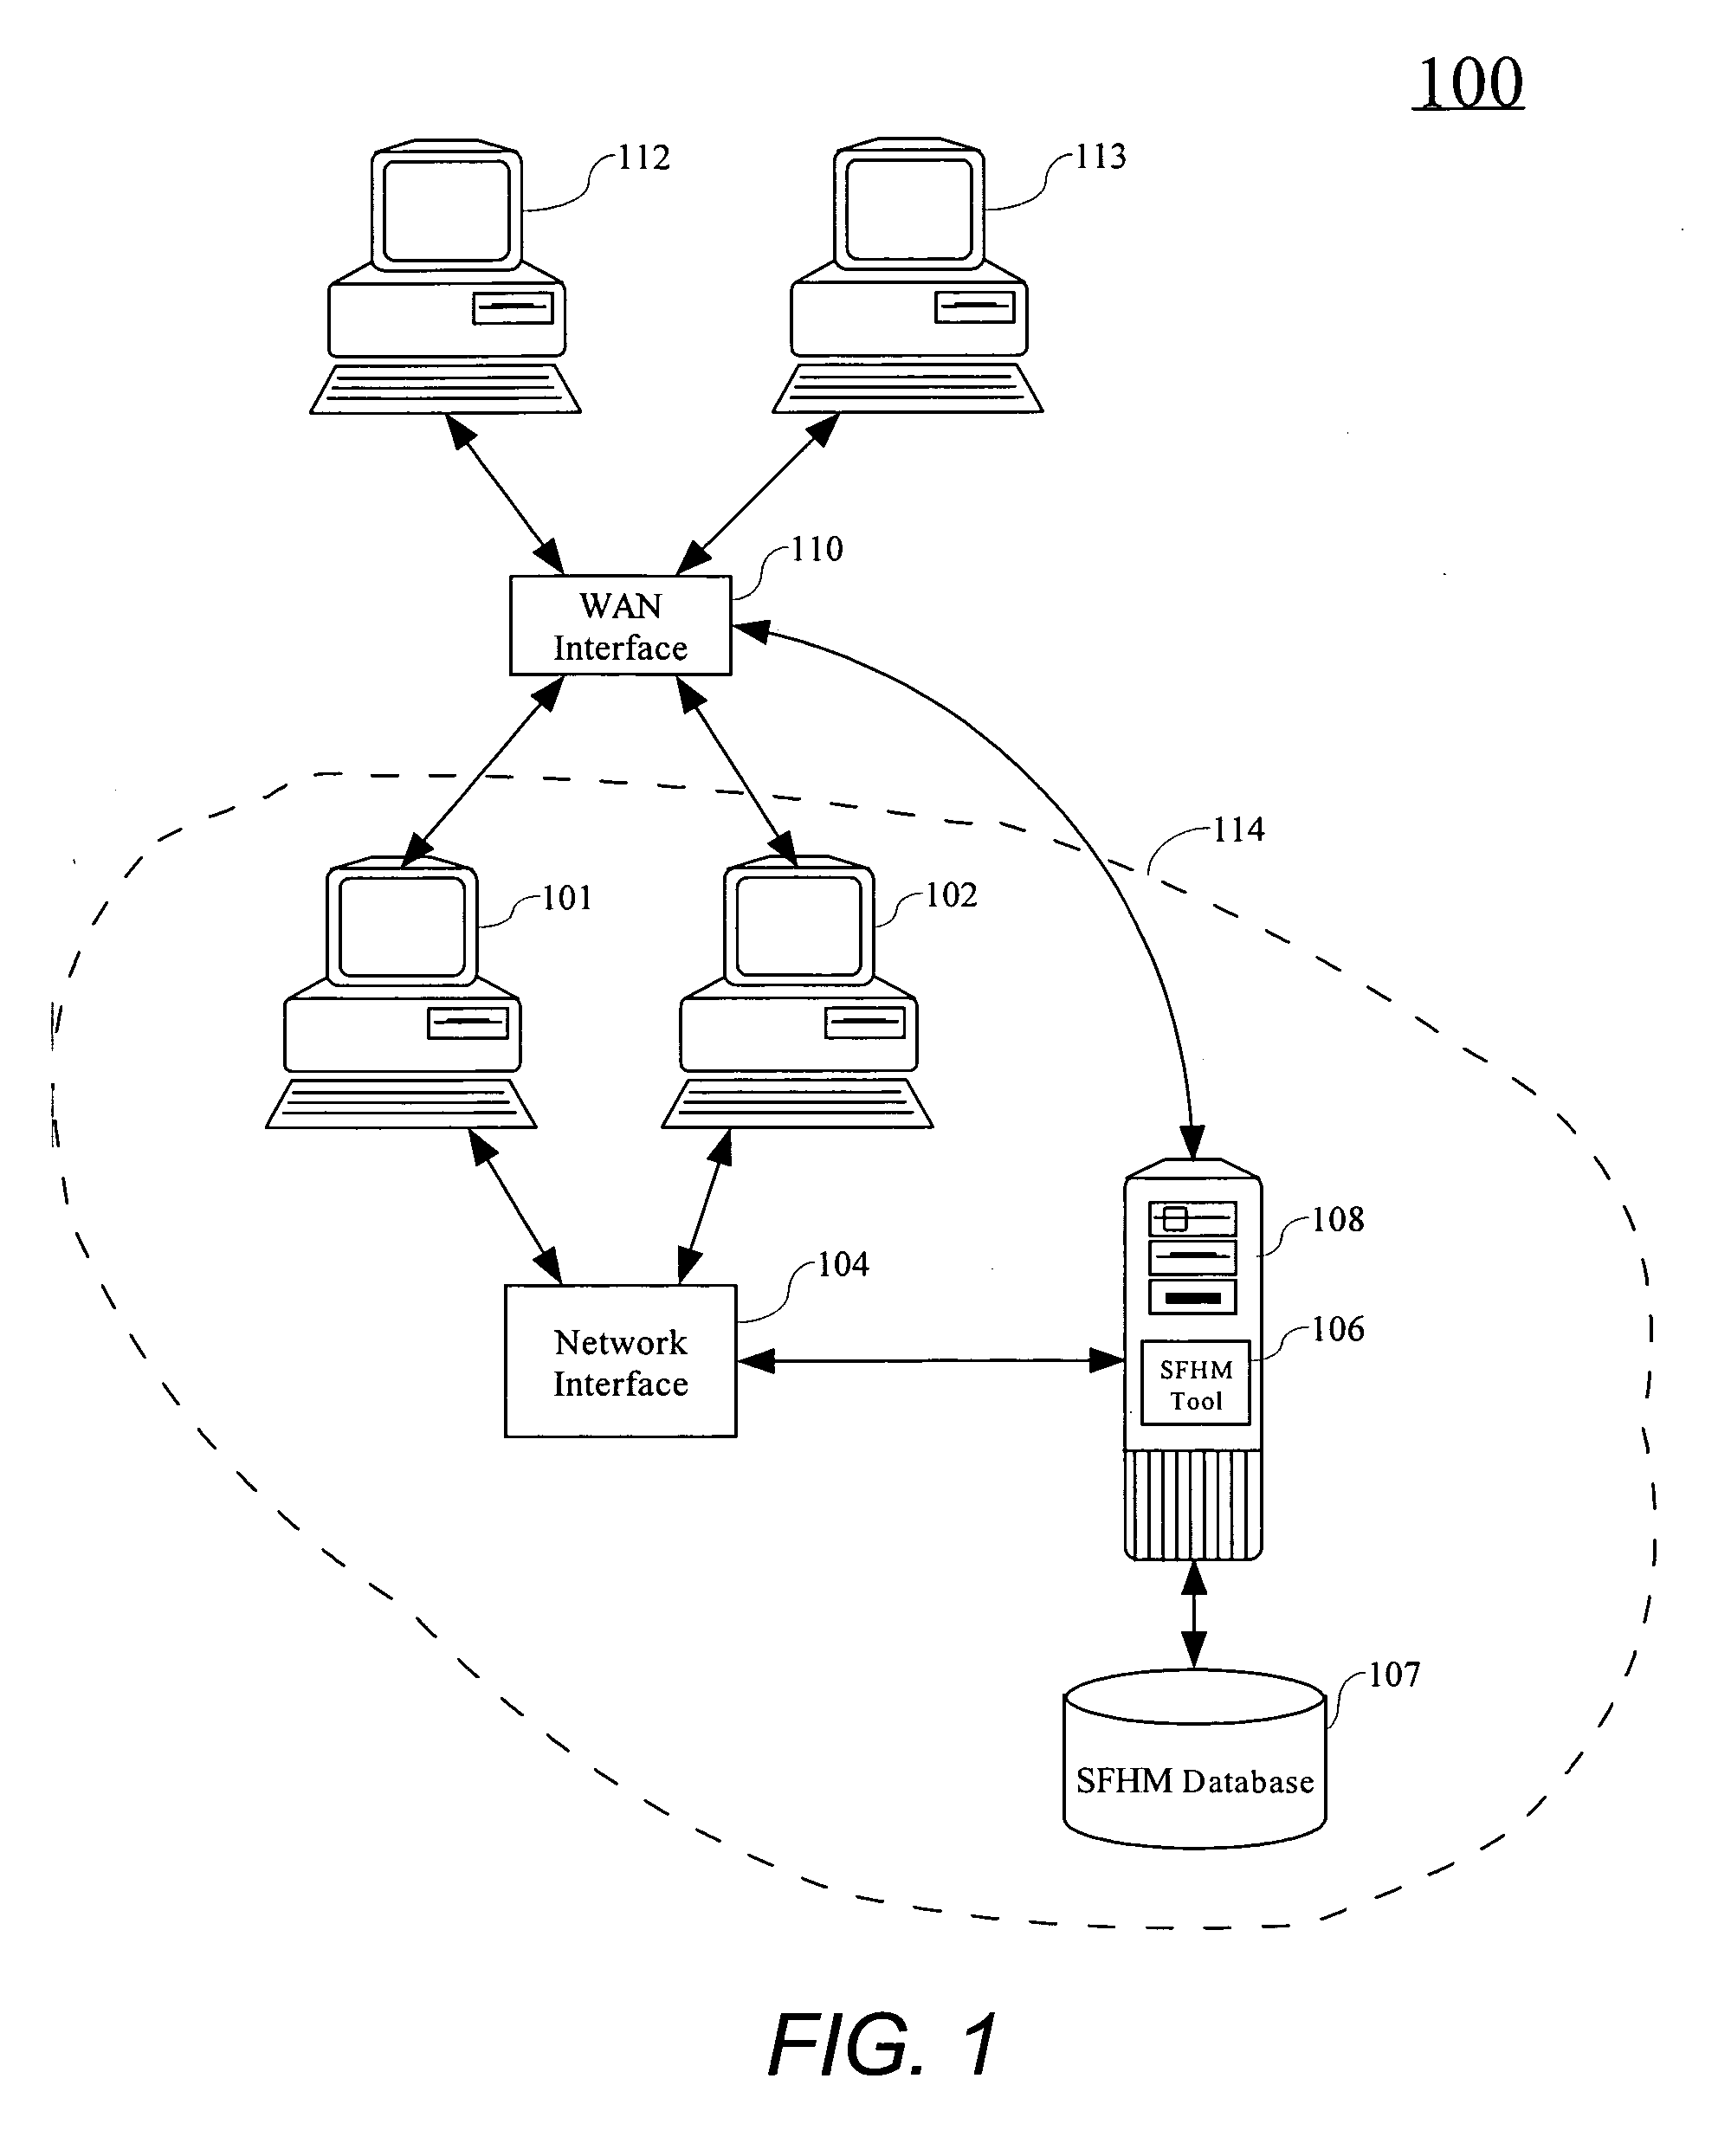 System and method for evaluating potential suppliers